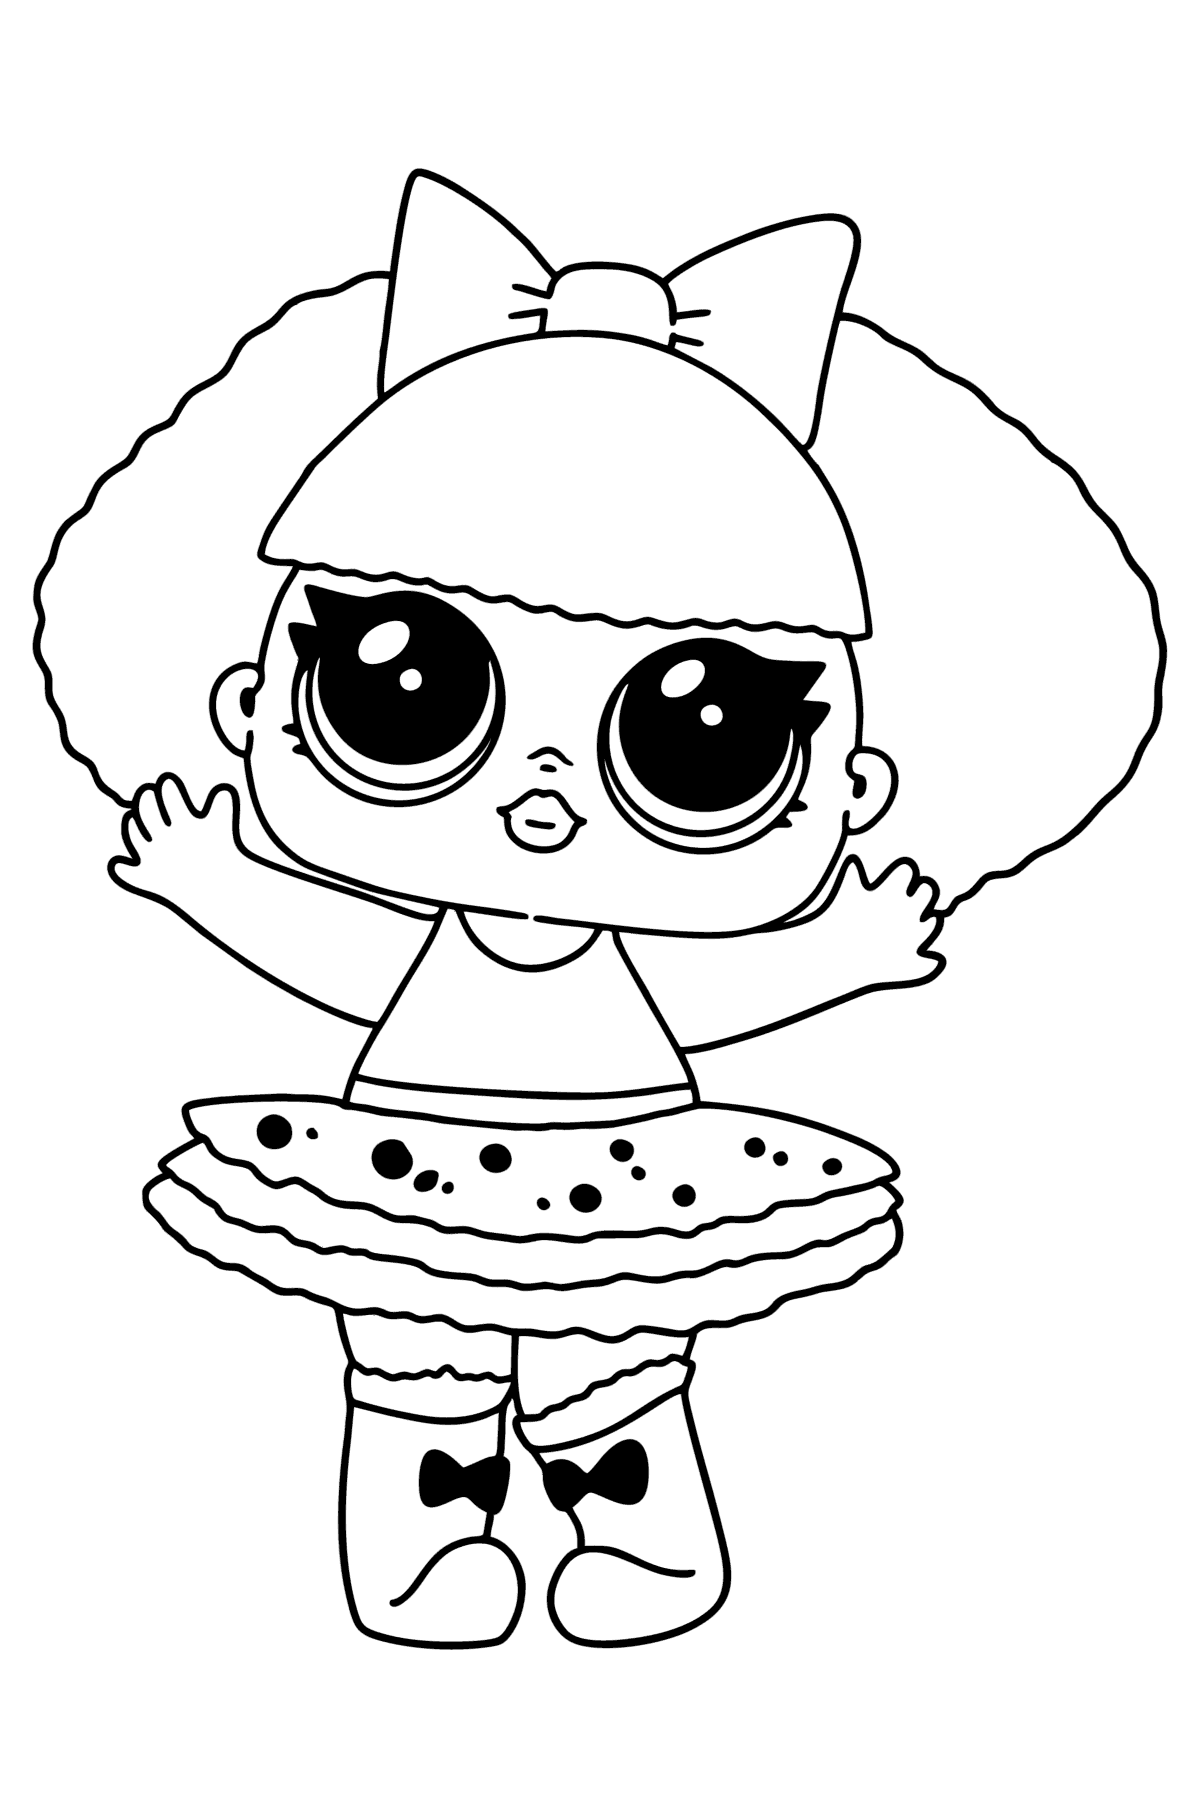 LOL Surprise Diva coloring page ♥ Online and Print for Free